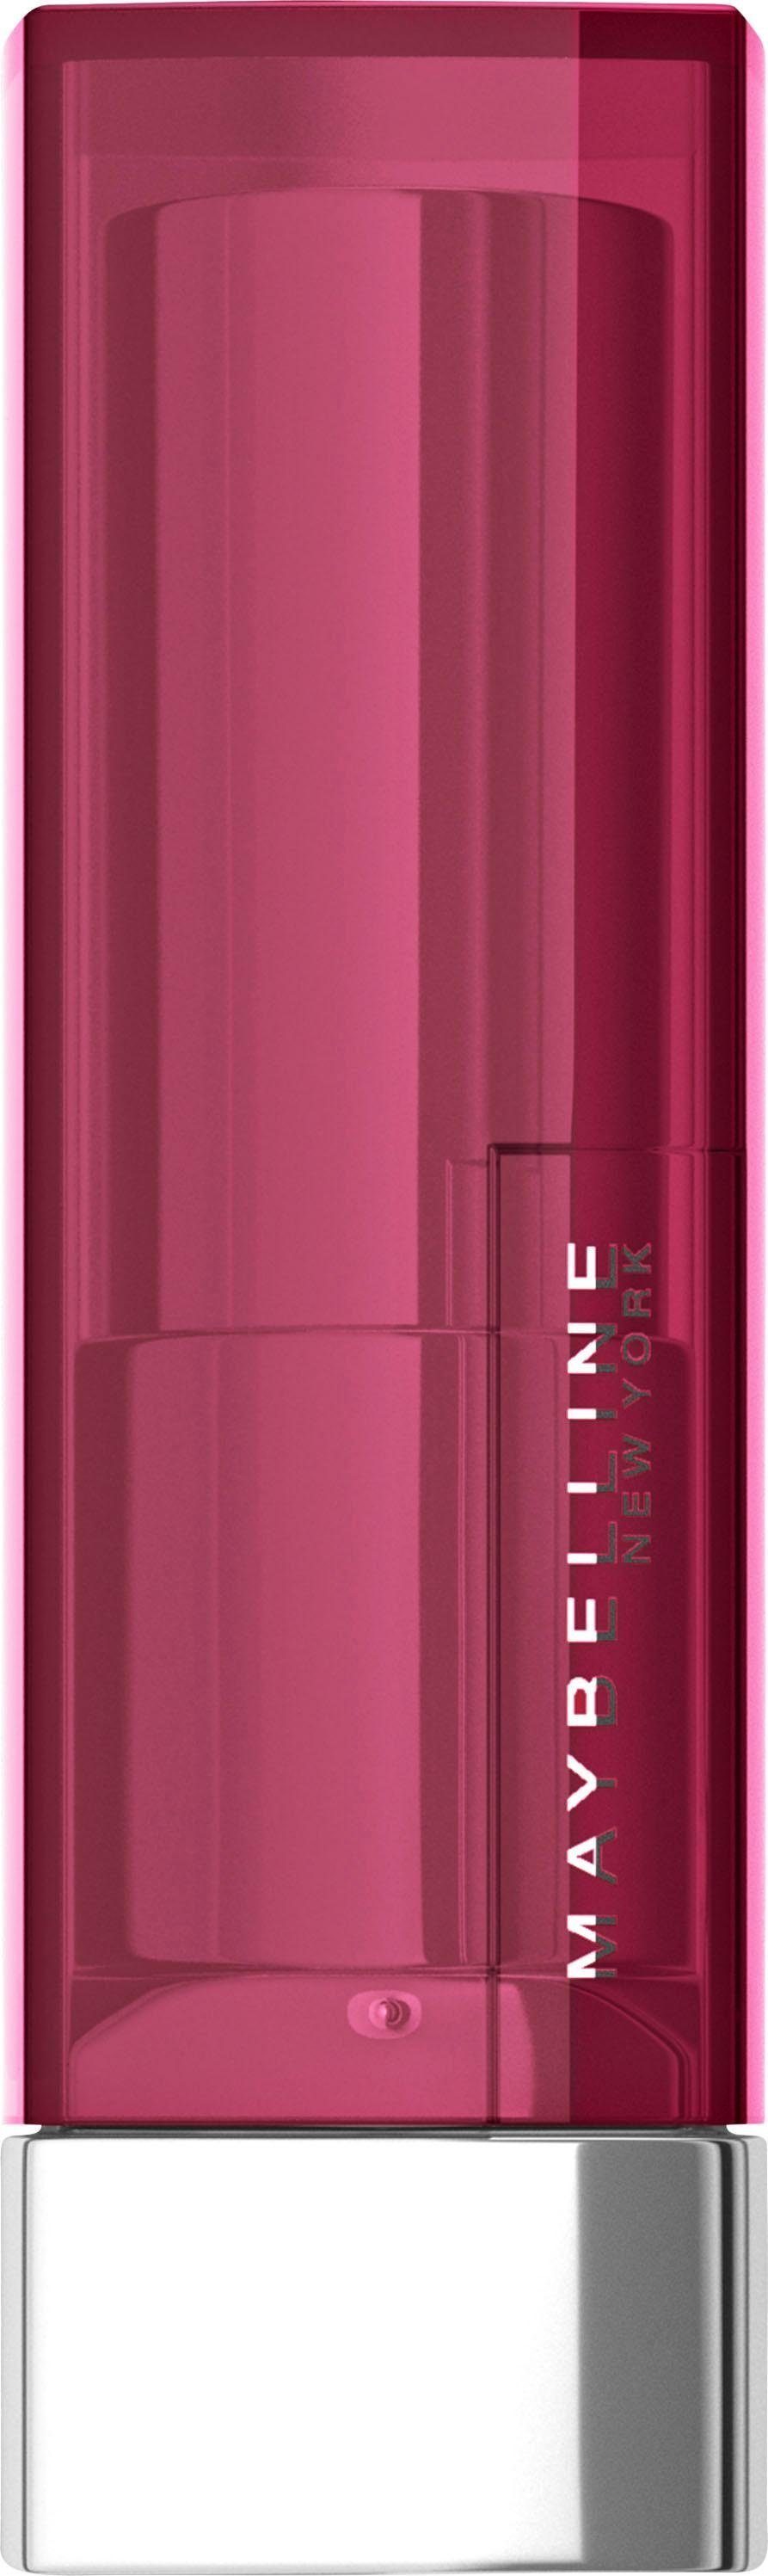 Lippenstift 300 NEW stripped rose MAYBELLINE YORK Sensational Roses Color Smoked